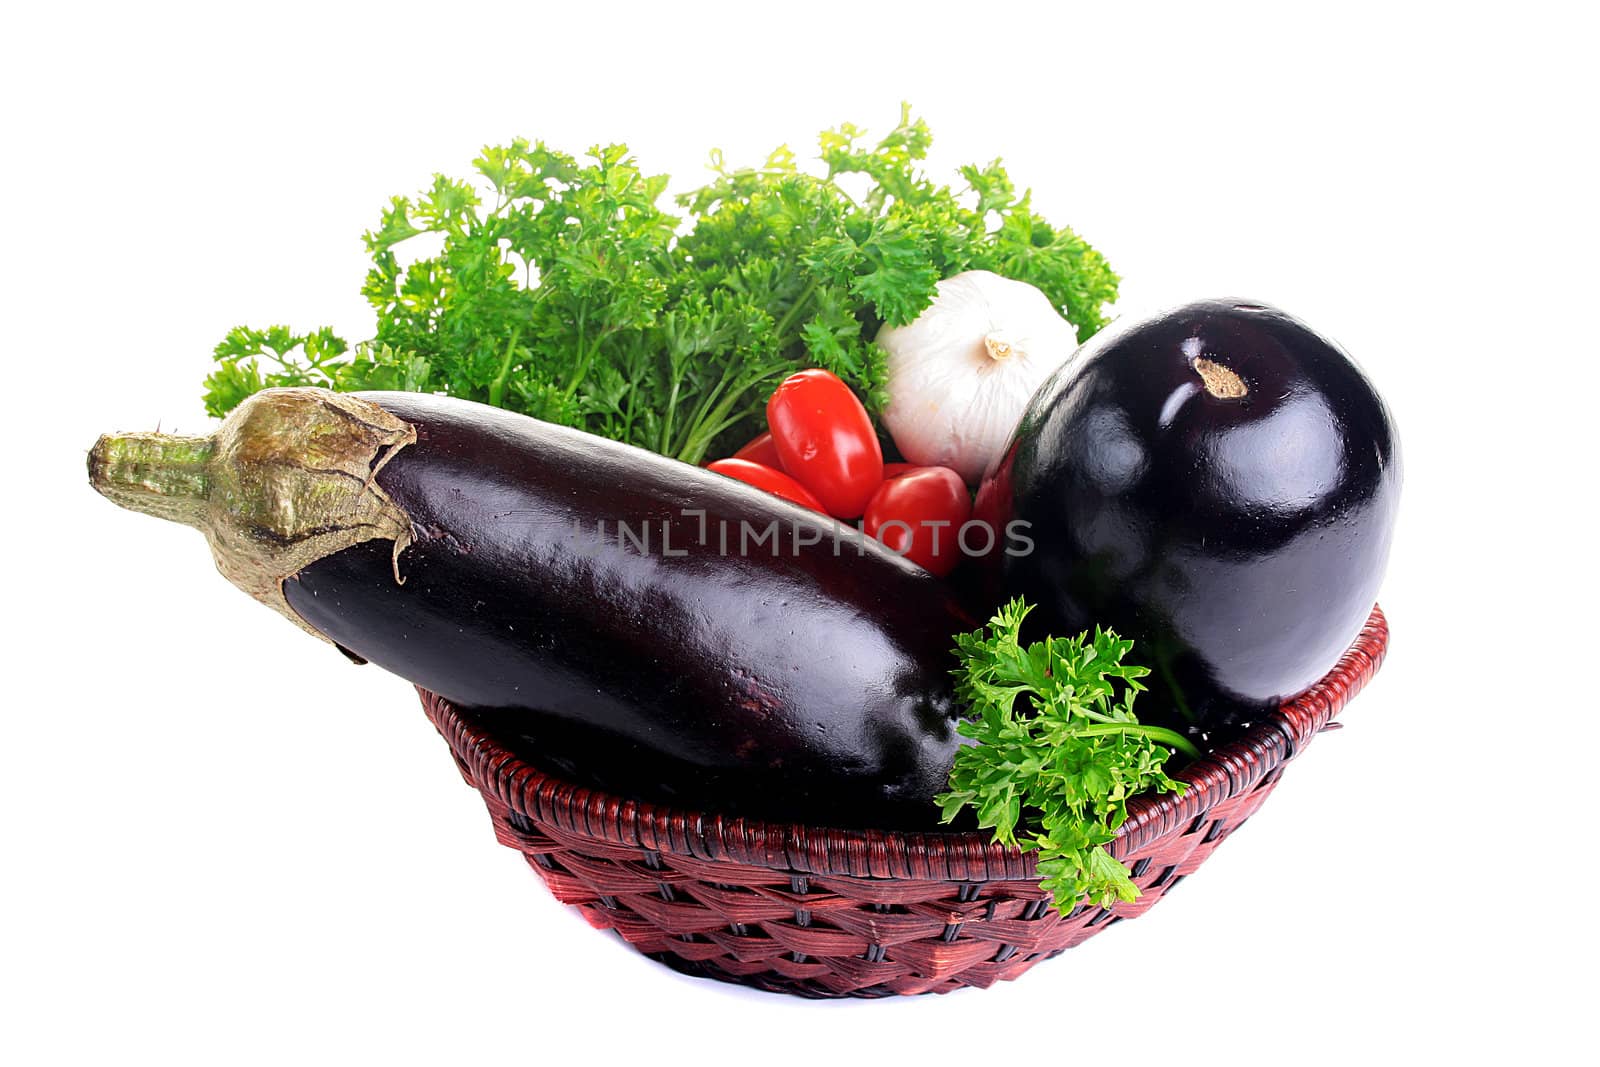 Eggplant with small tomatoes and fresh parsley.